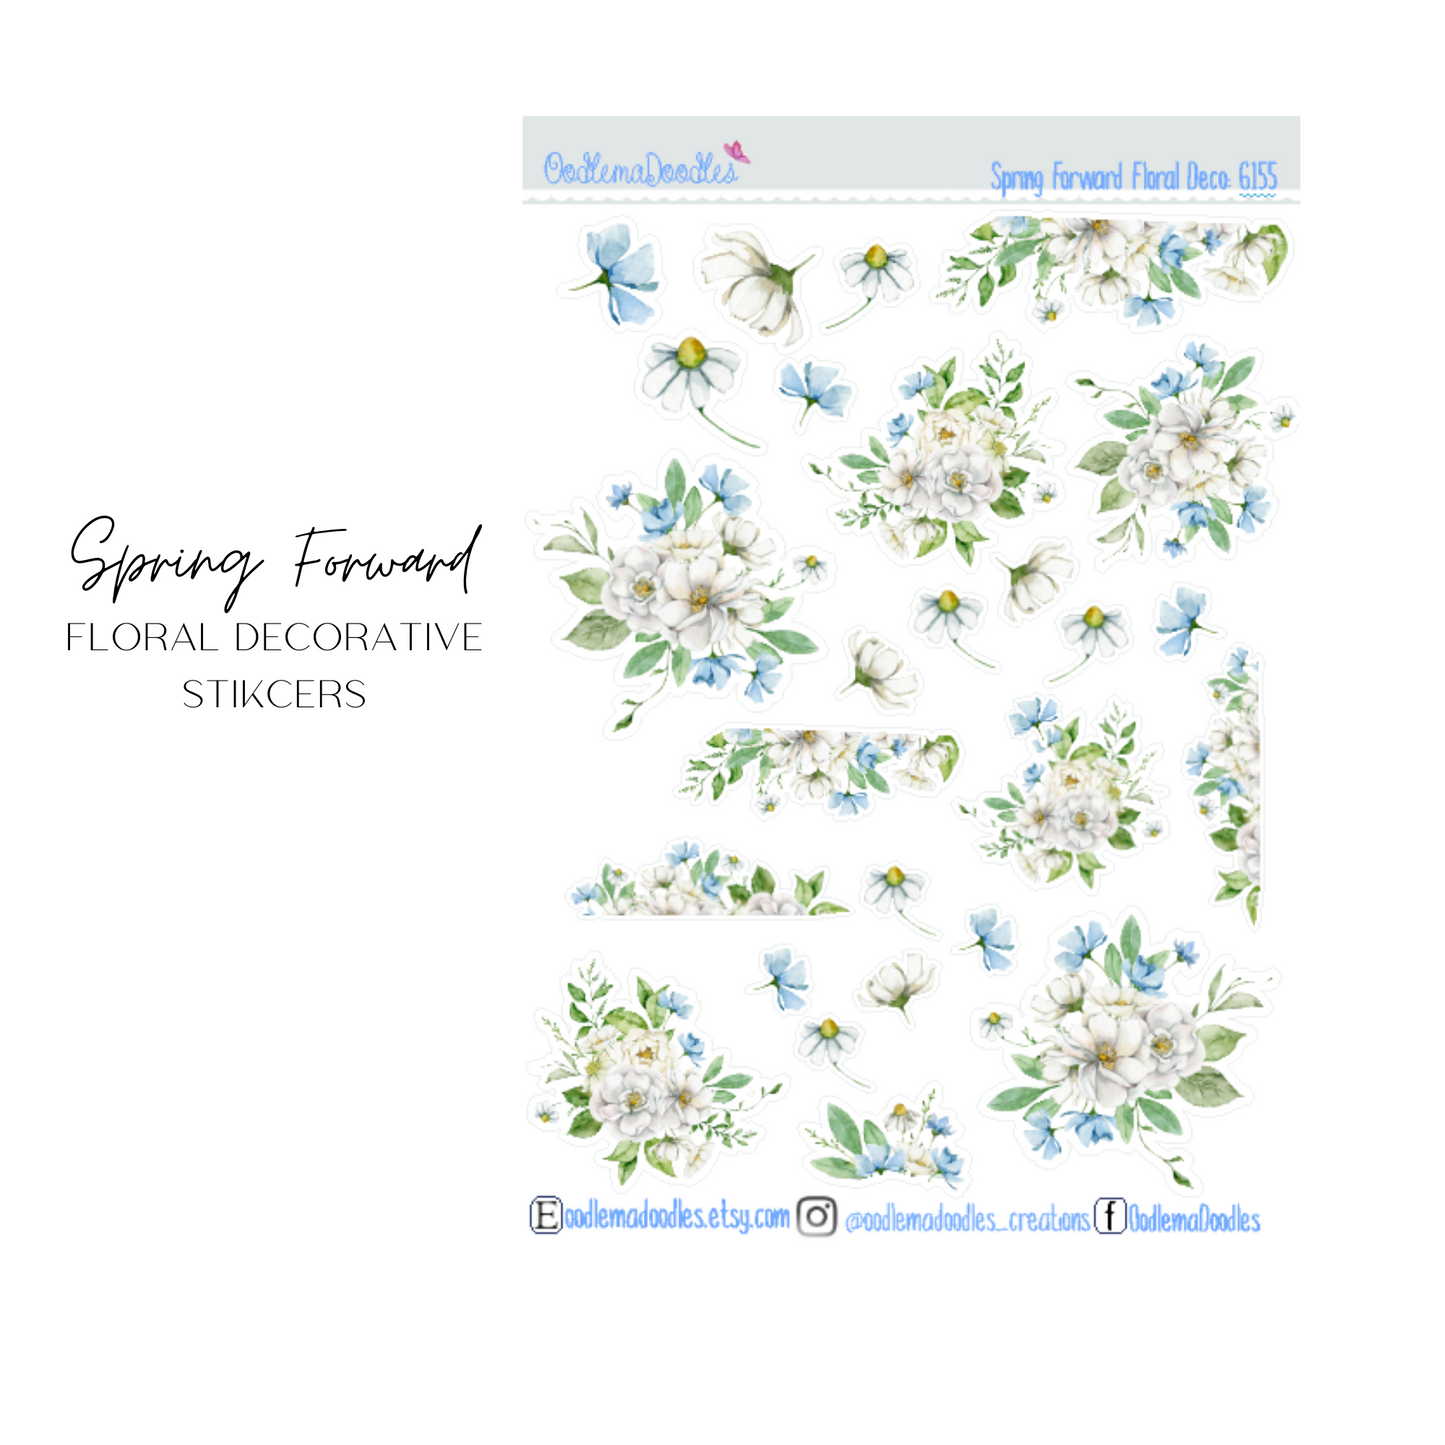 Spring Forward Floral Decorative Stickers